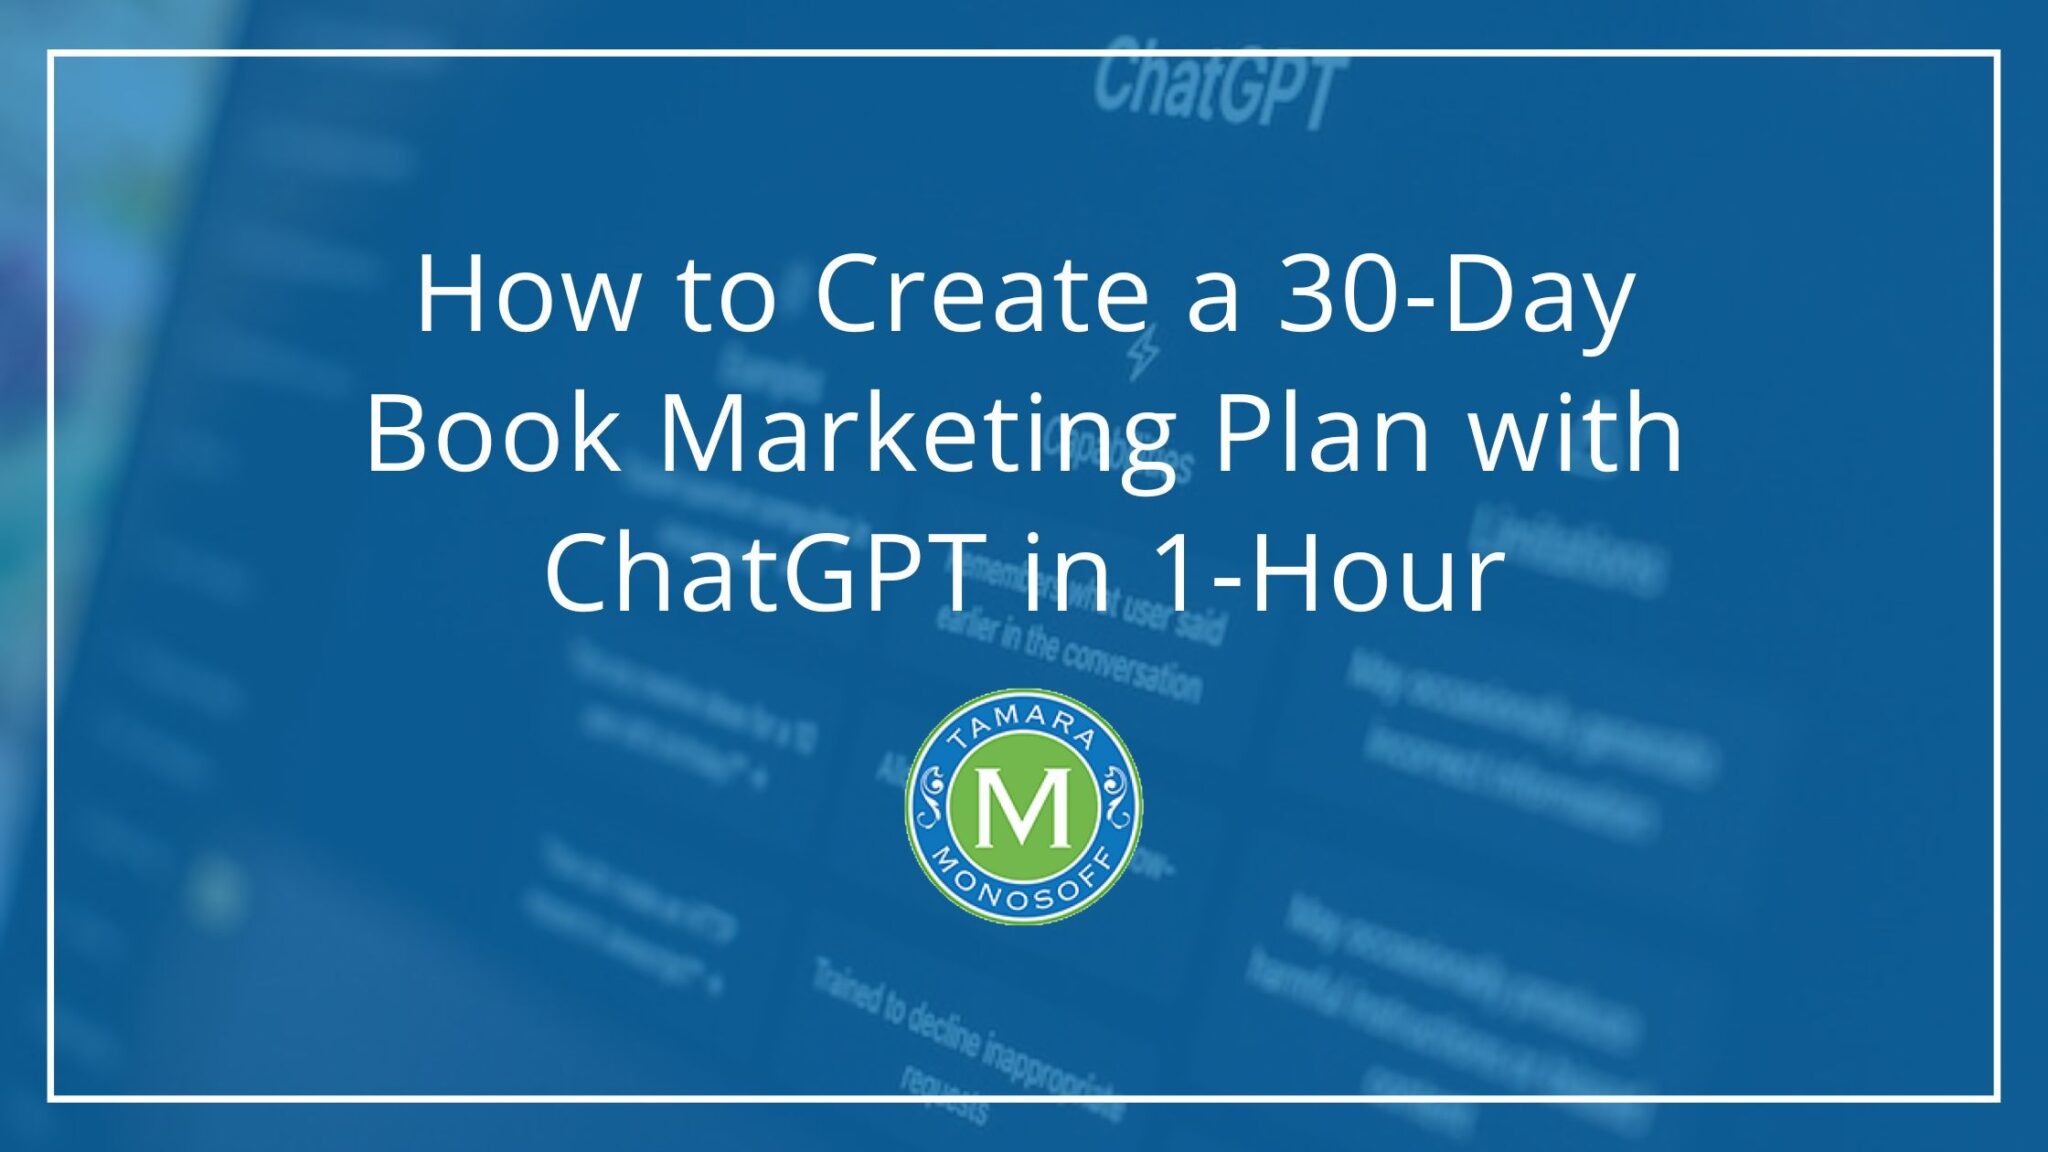 How to Create a 30-Day Book Marketing Plan with ChatGPT in 1-Hour